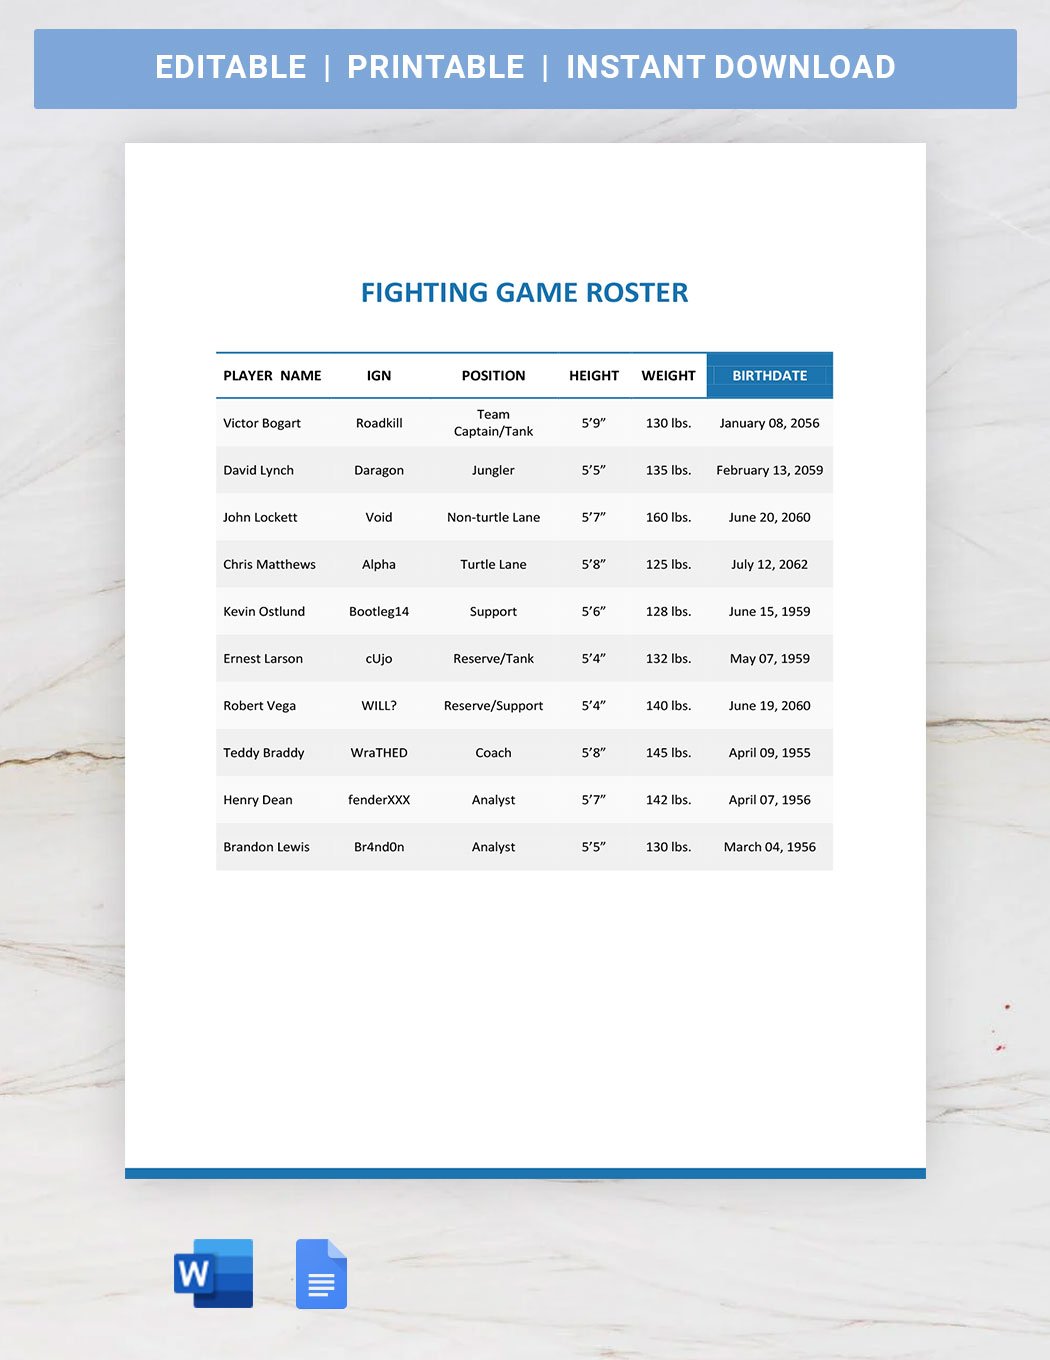 Fighting Game Roster Template